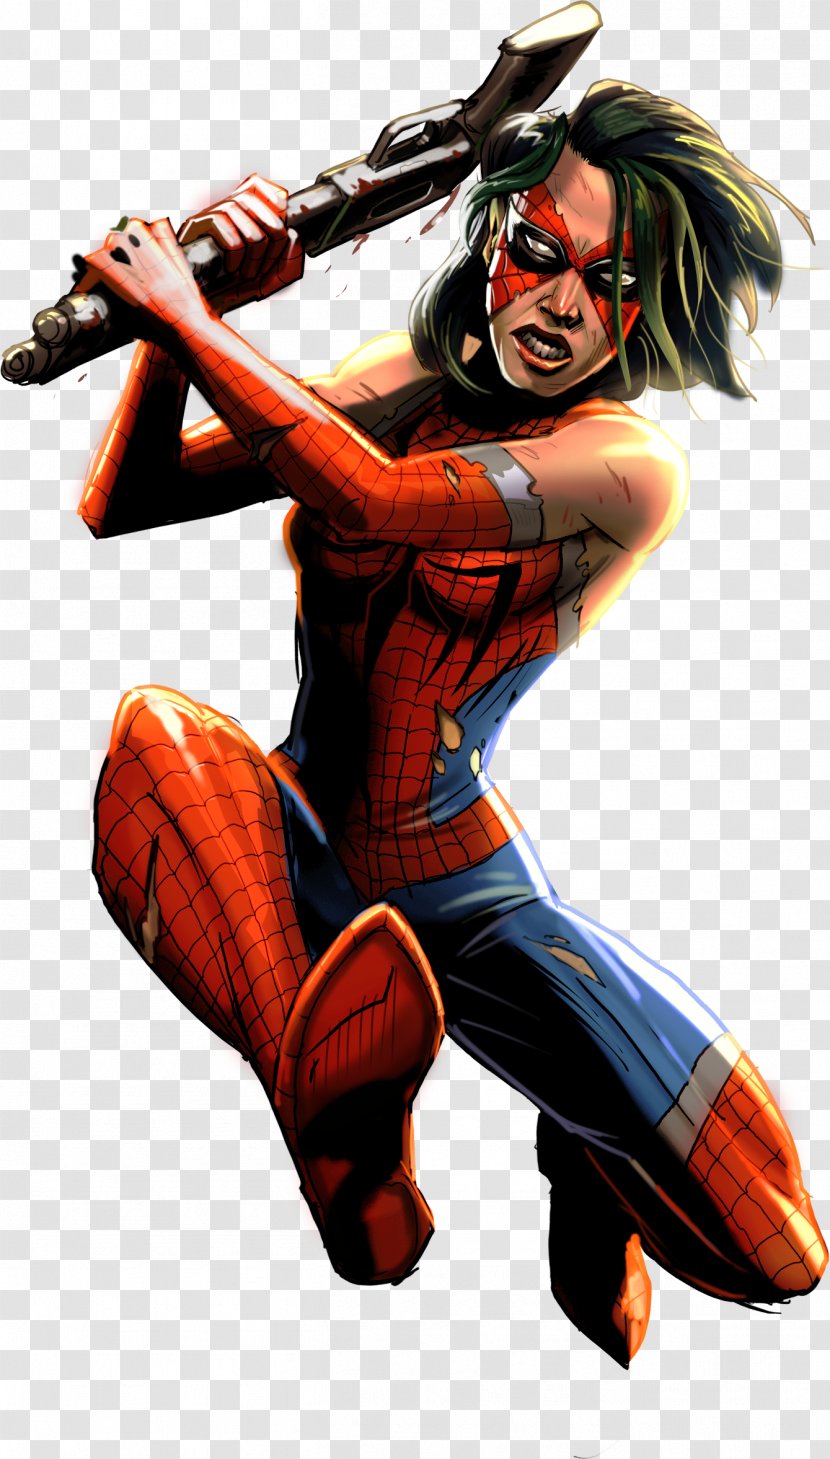 Spider-Man Anya Corazon Spider-Girl May Parker Felicia Hardy - Spidergirl - That One Transparent PNG